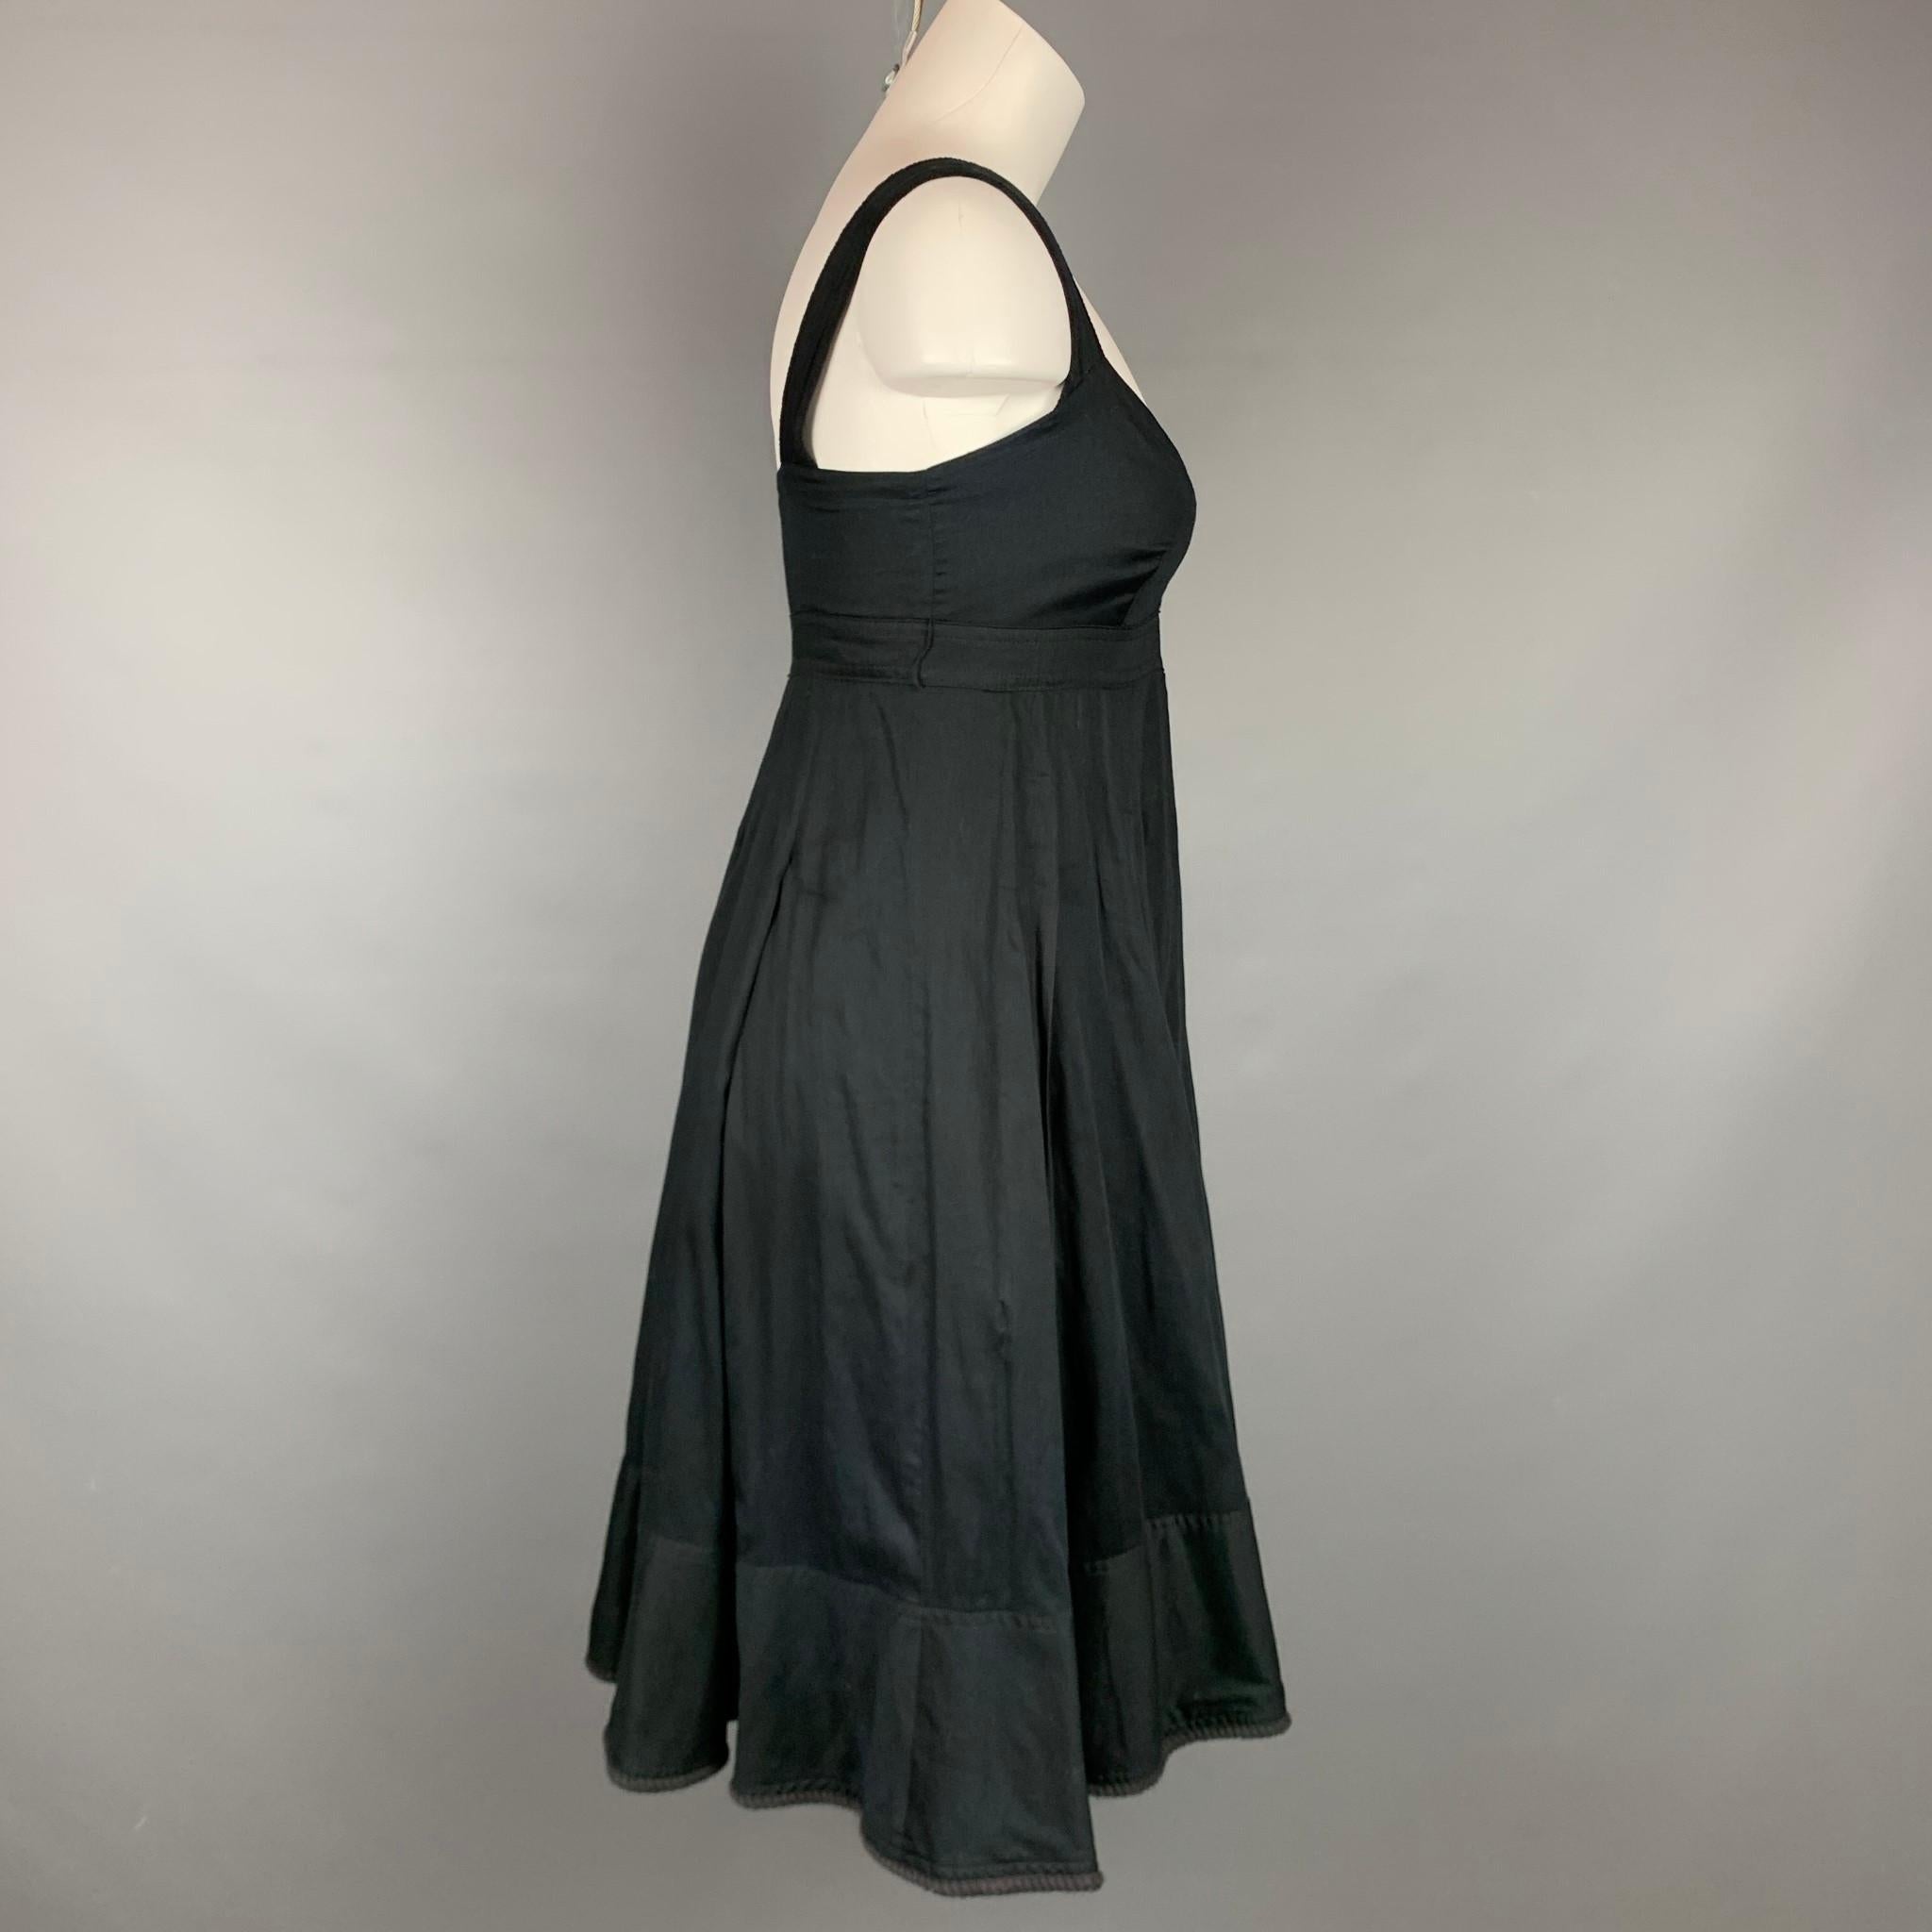 BURBERRY LONDON dress comes in a black pleated cotton featuring a twisted trim, a-line style, and a side zipper closure. Made in Italy.

Very Good Pre-Owned Condition.
Marked: US 4 / UK 6
Original Retail Price: $850.00

Measurements:

Bust: 32